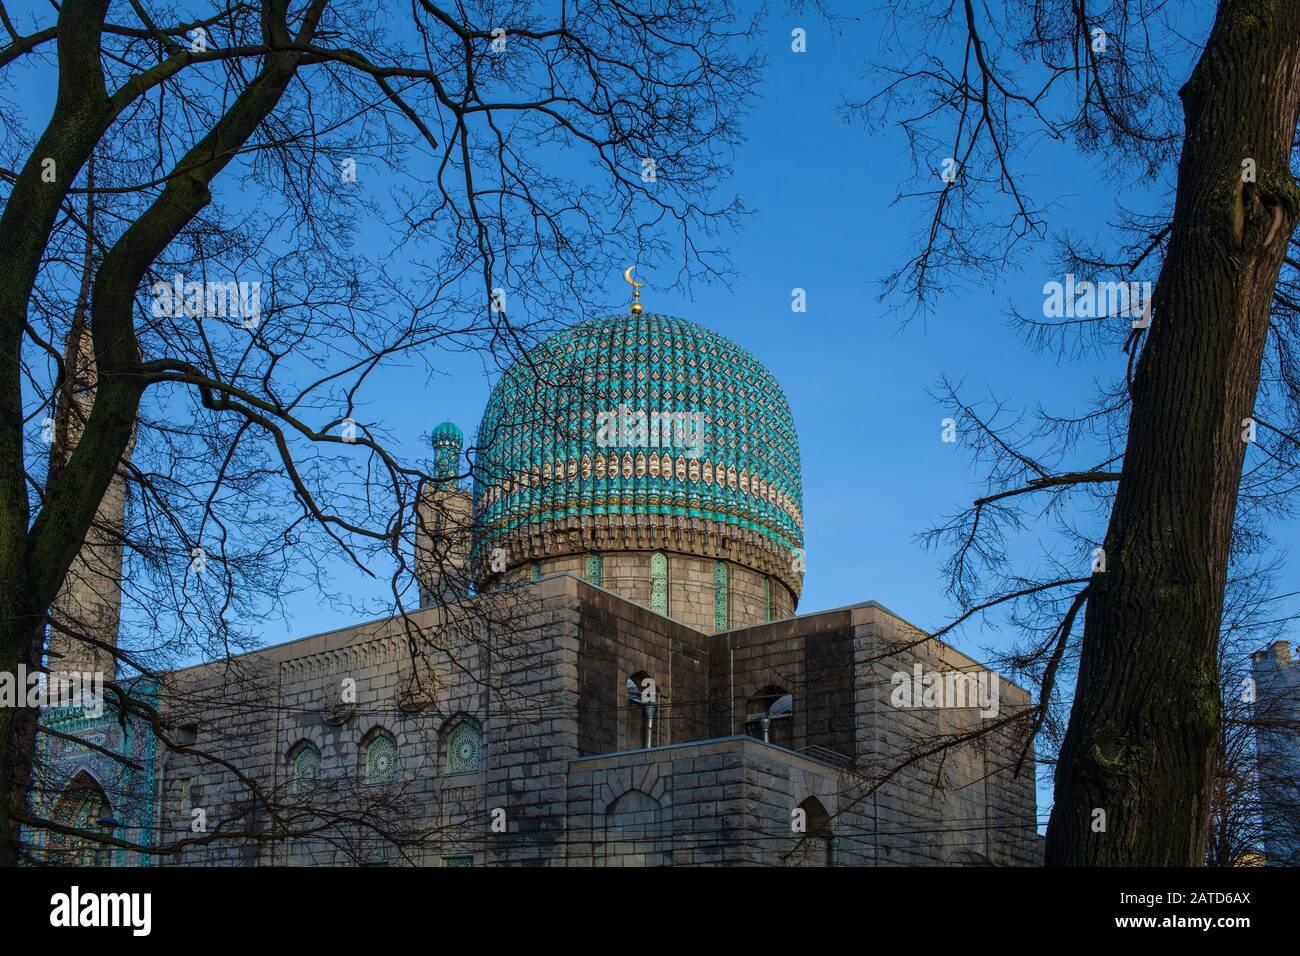 St Petersburg Mosque High Resolution Stock Photography and Images - Alamy